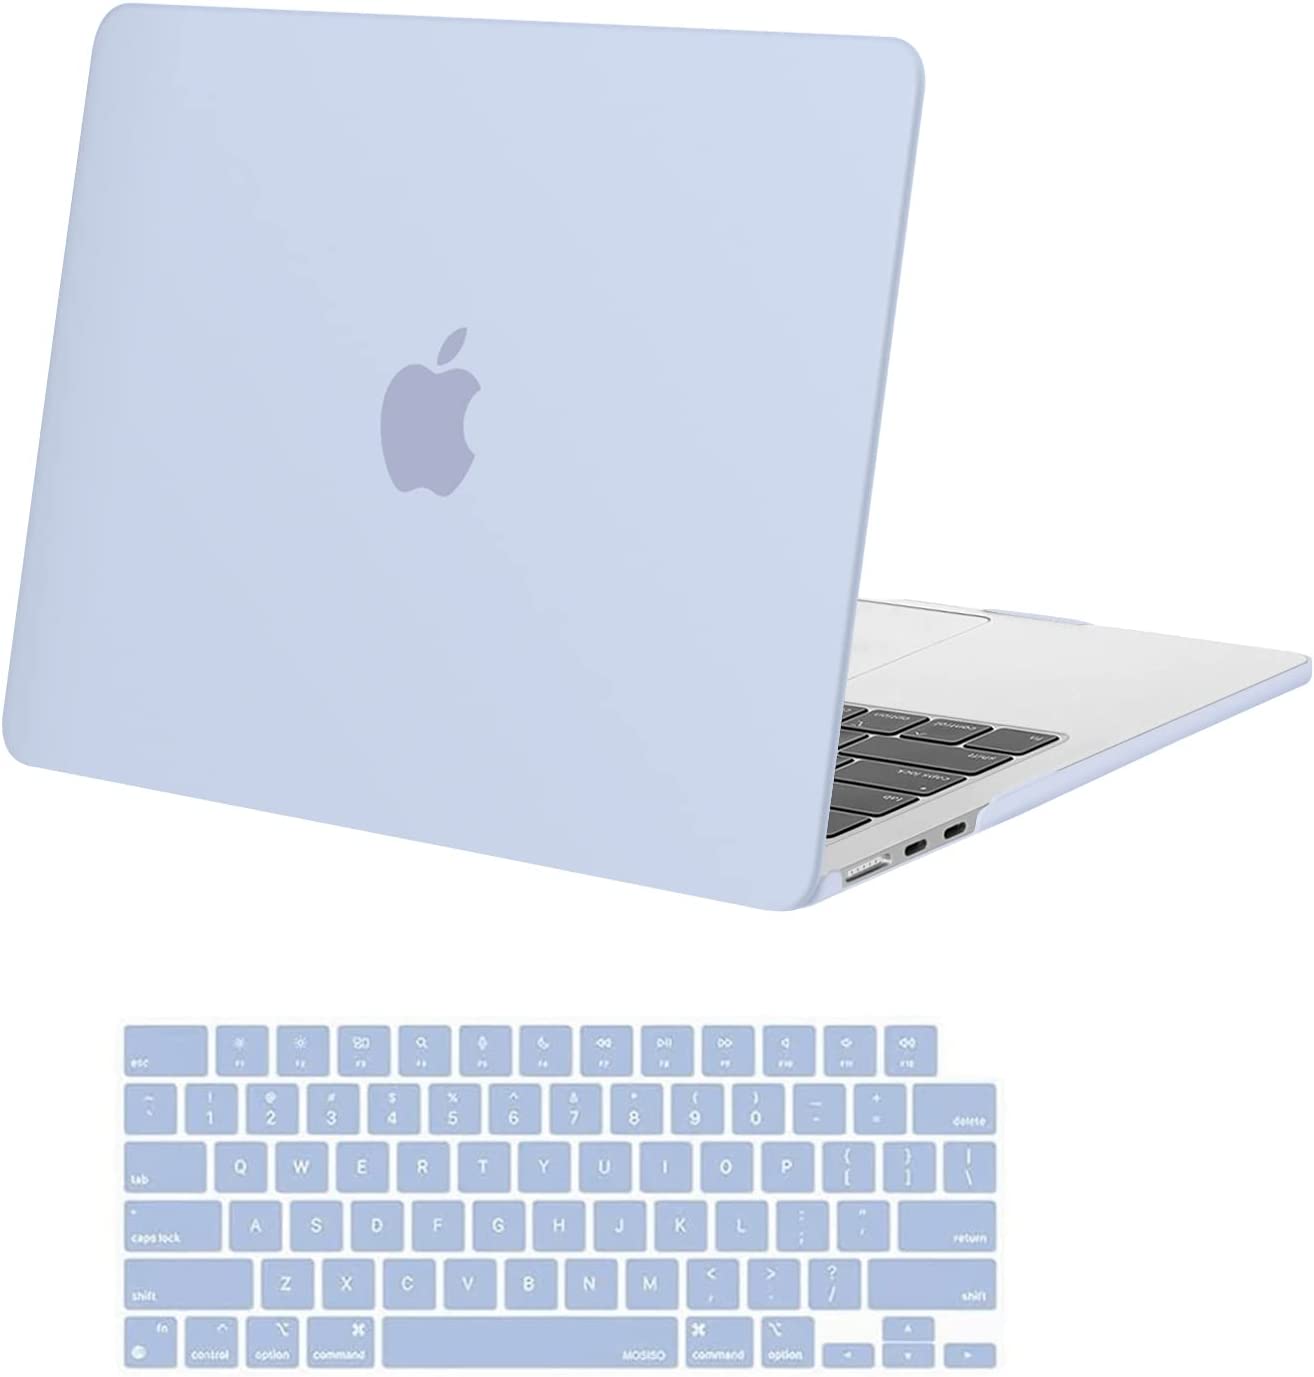  Apple 2022 MacBook Air Laptop with M2 chip: 13.6-inch